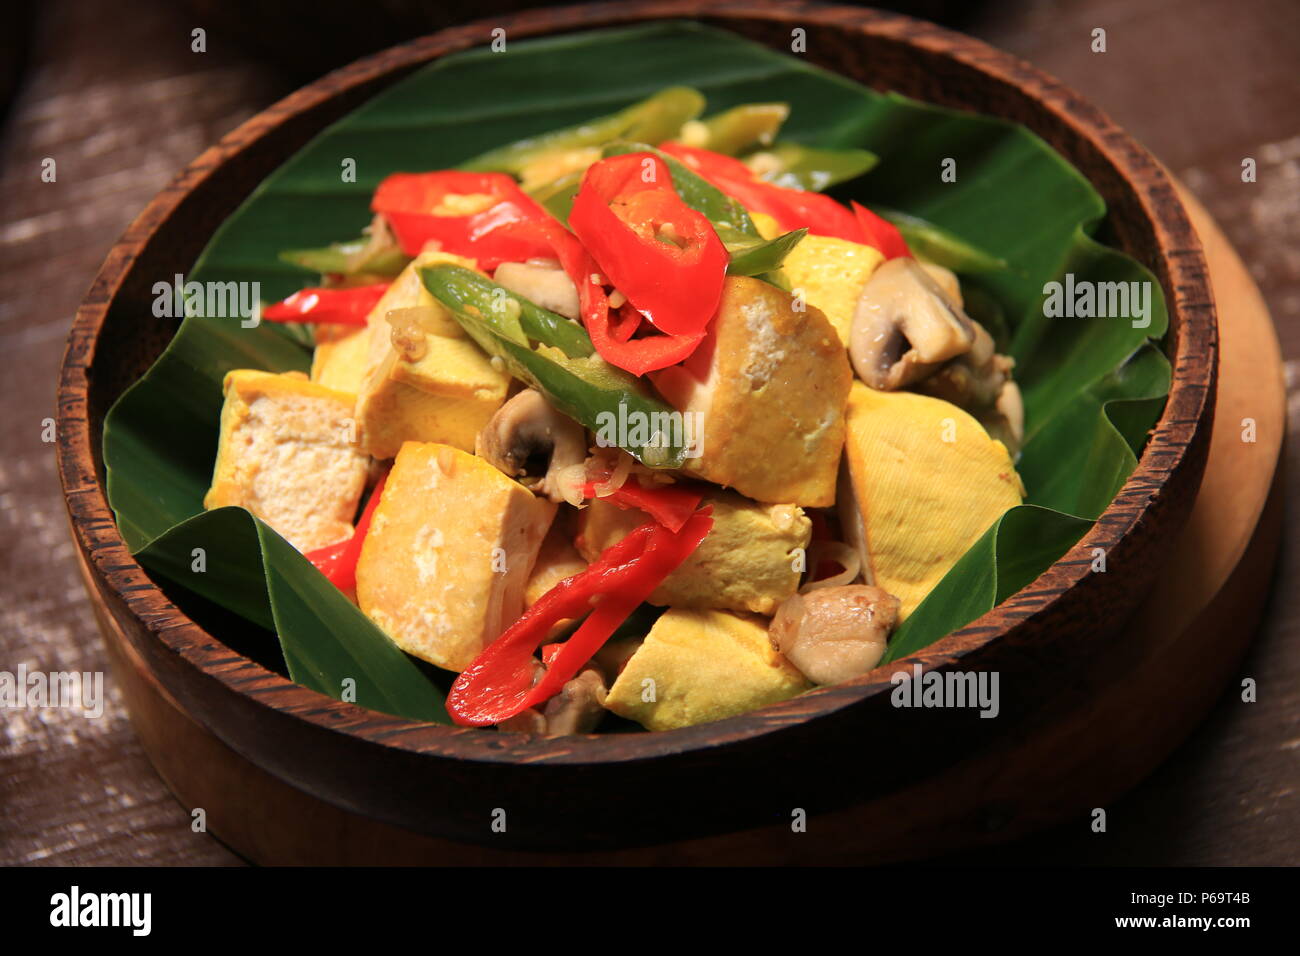 Tumis Tahu Bandung, the Stir-Fried Dish of Yellow Bean Curd with Chili Peppers Stock Photo